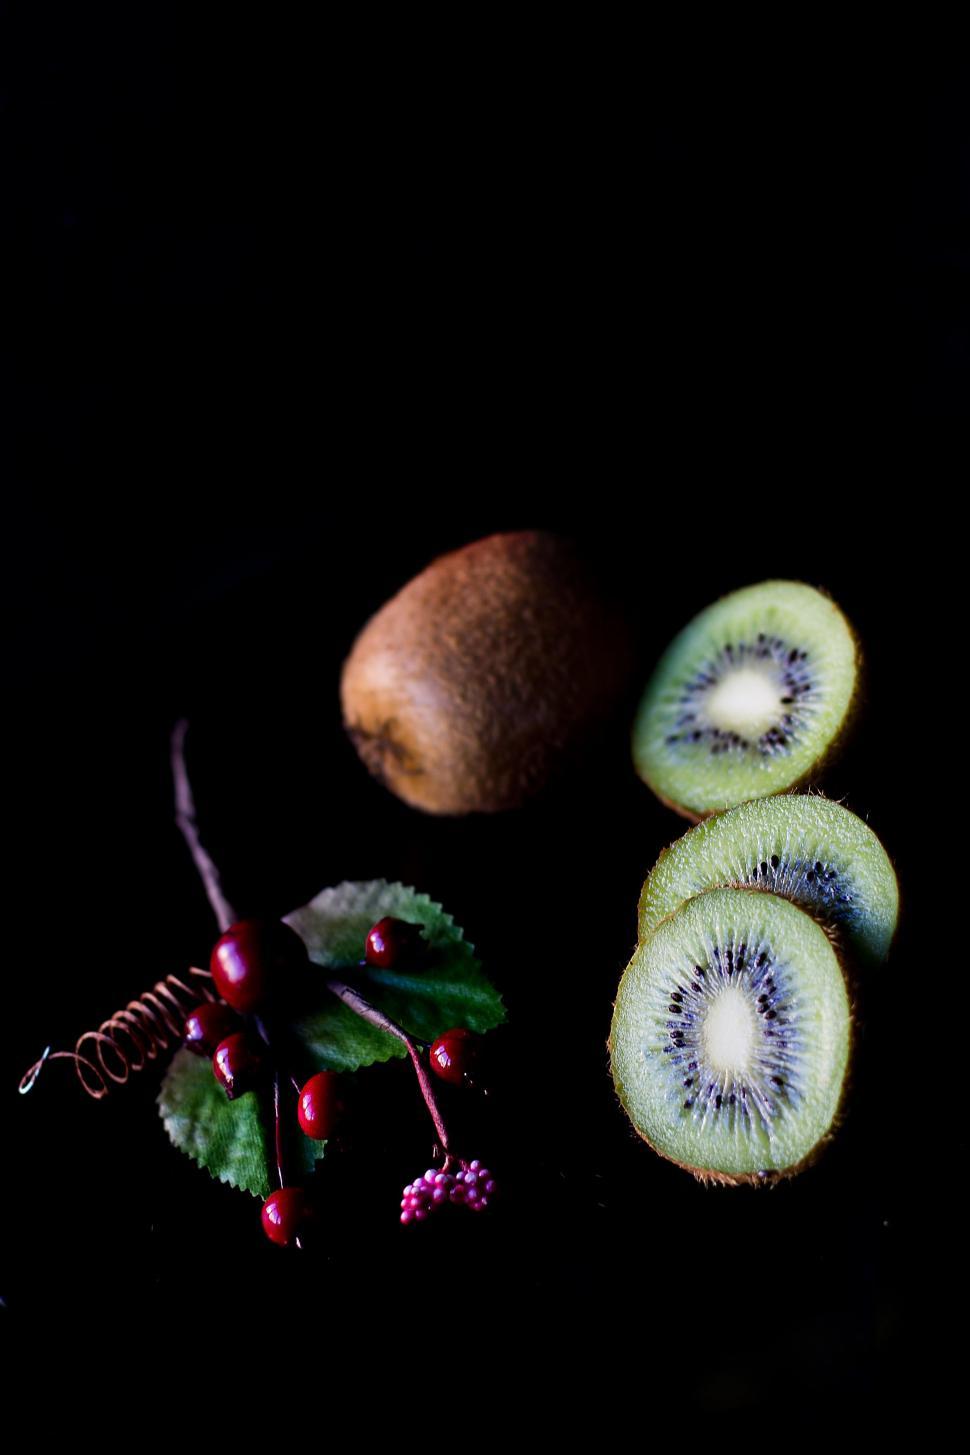 Free Image of Kiwis and Berries on a Black Background 